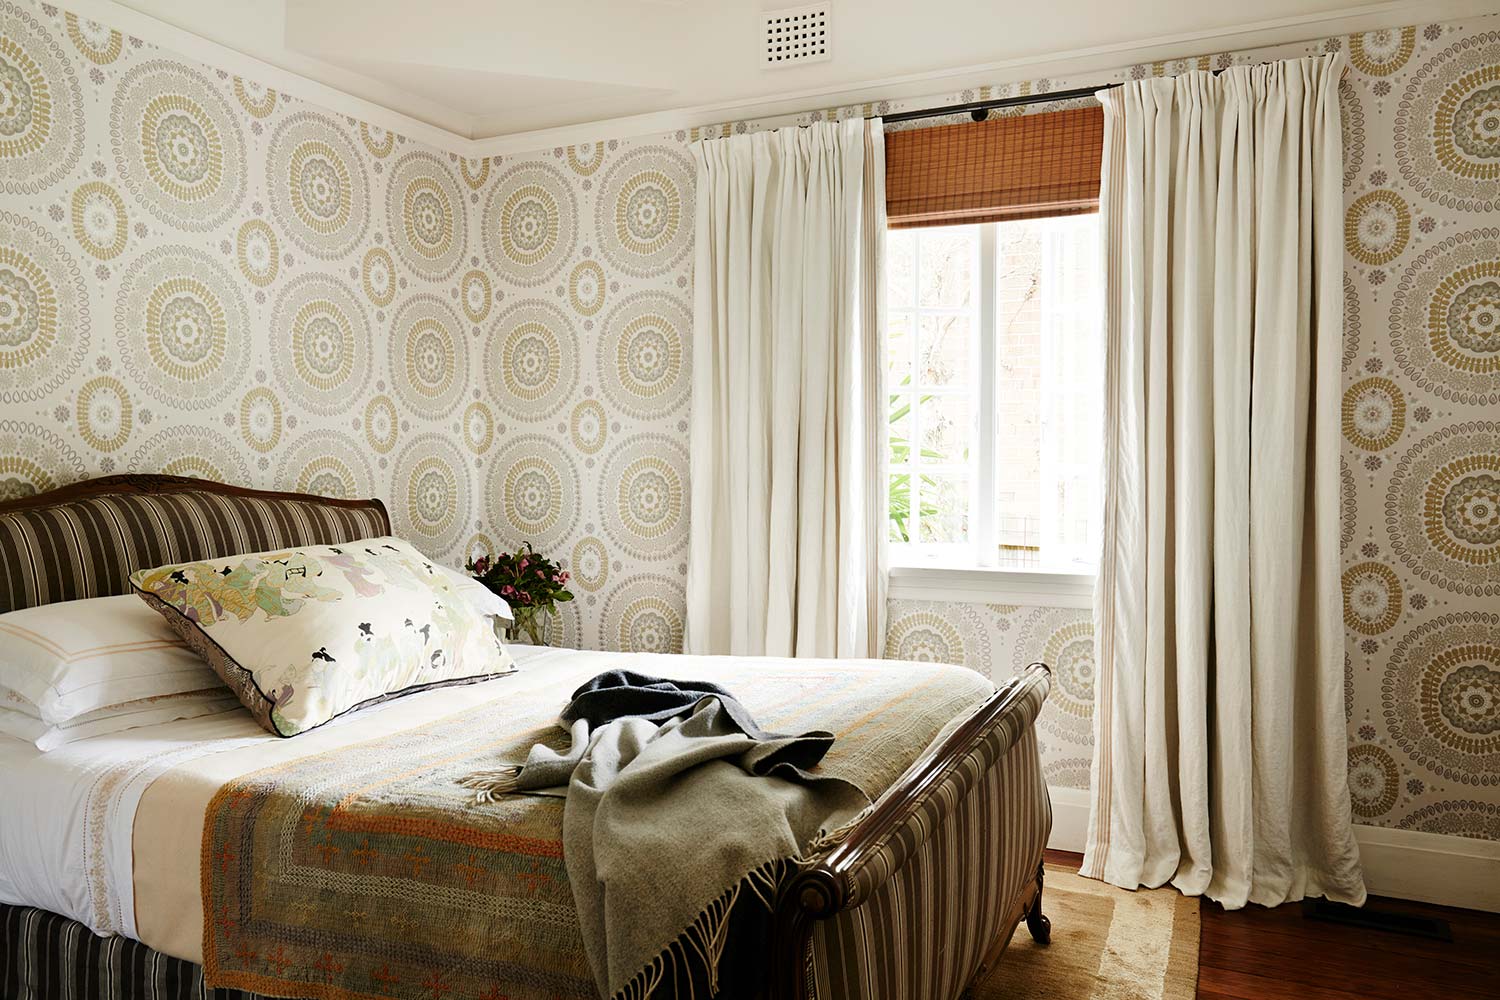 Neutral Curtains and Window Furnishings - No Chintz Textiles